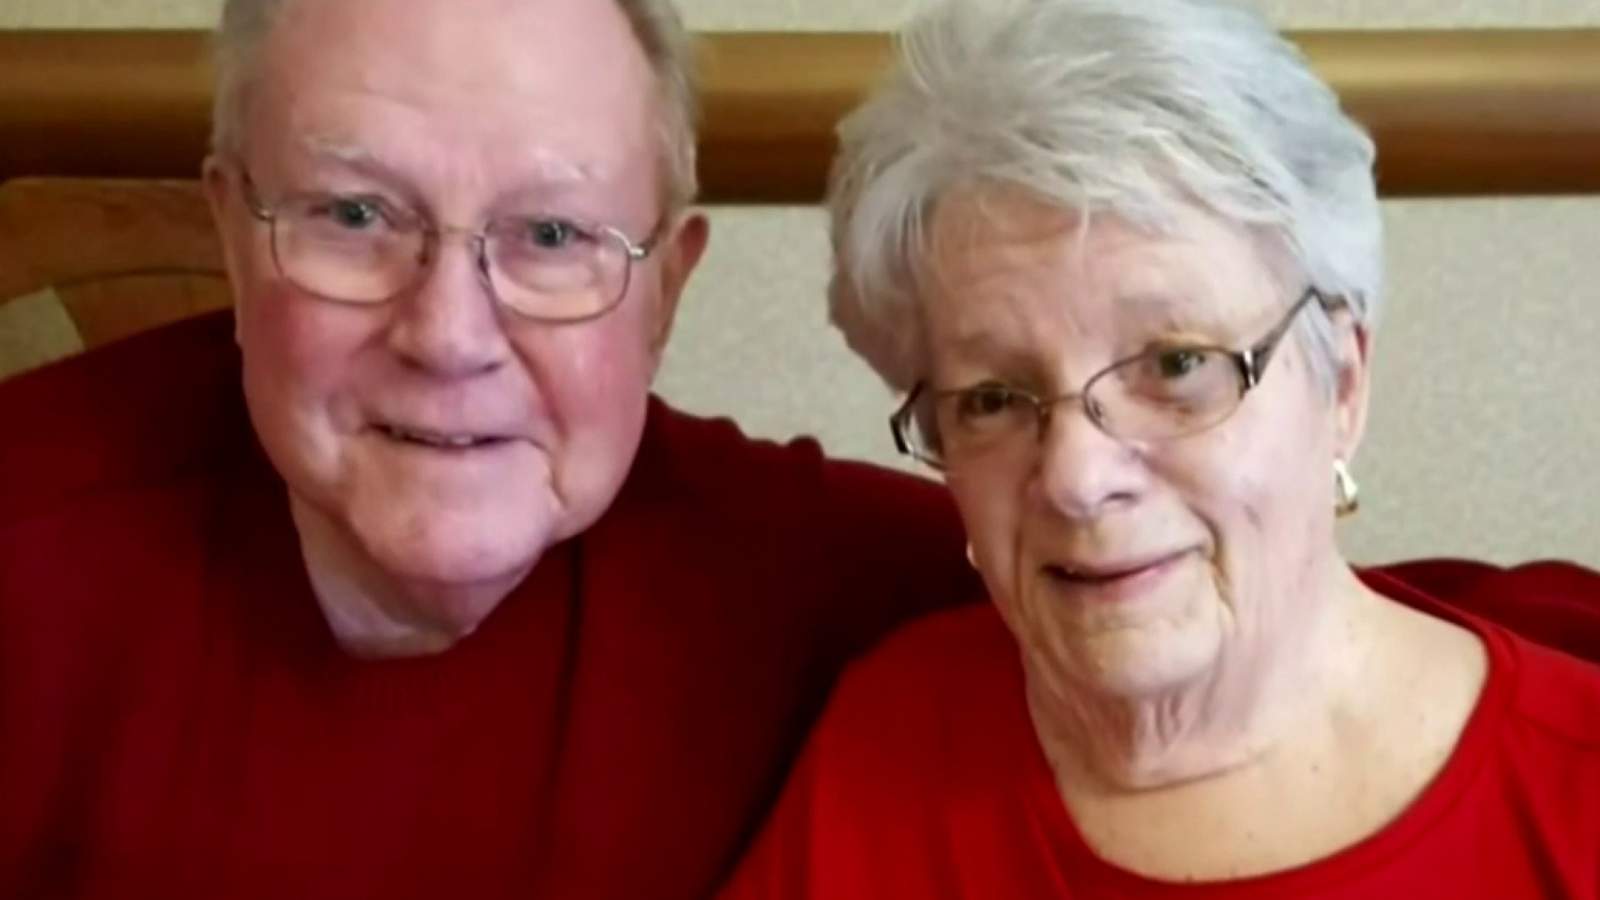 Port Huron man takes job at nursing home to see his wife during COVID-19 pandemic